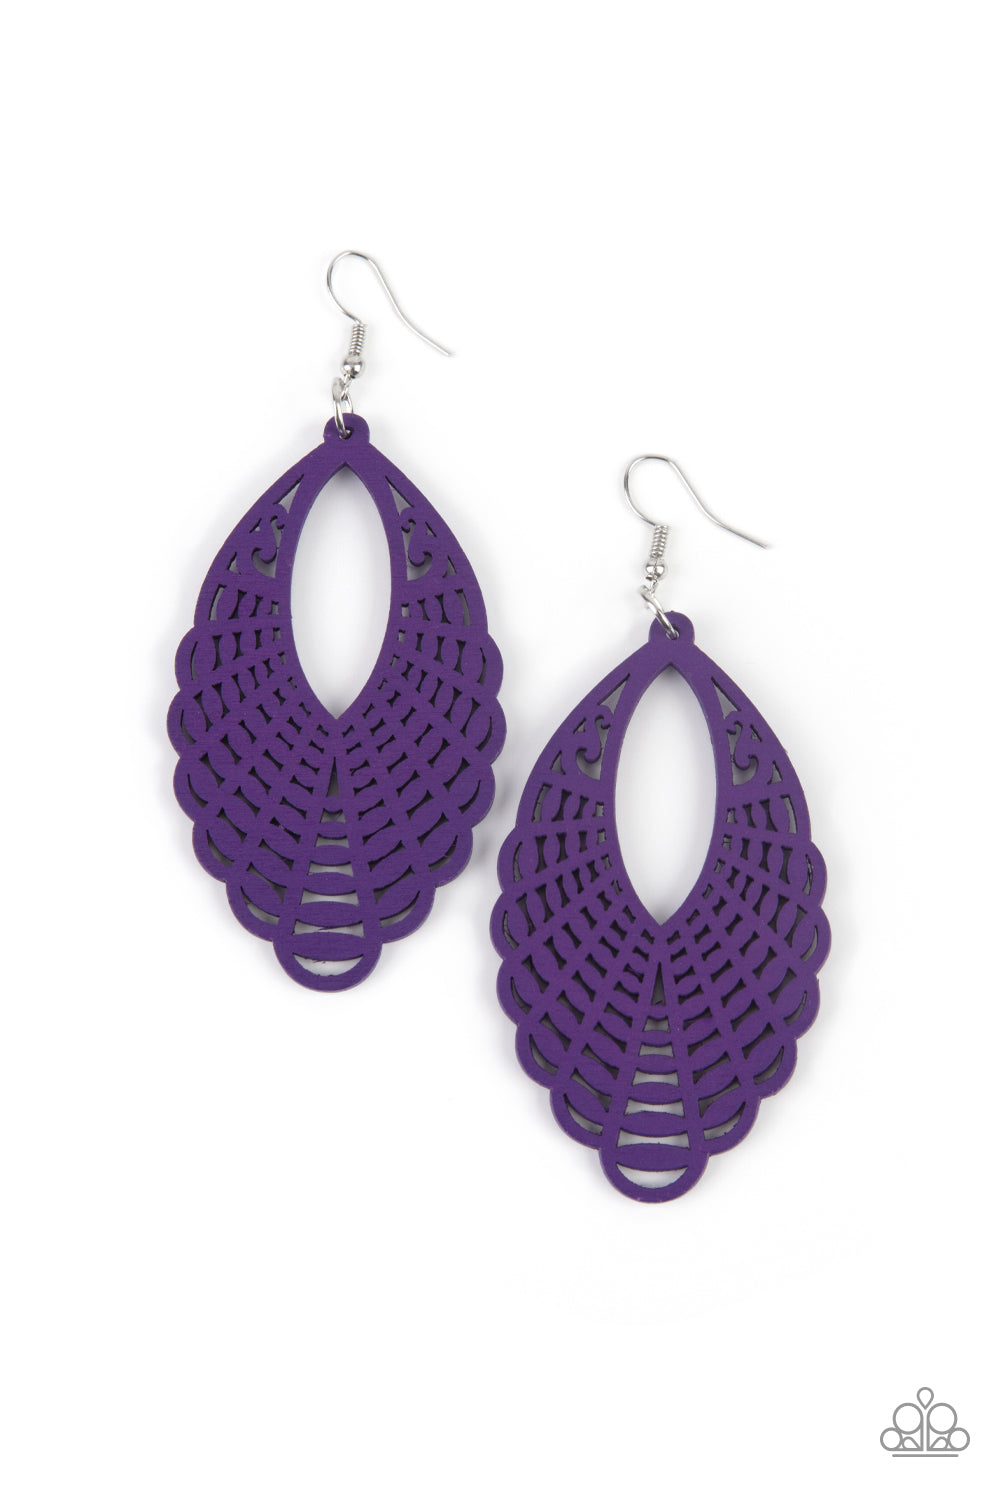 Tahiti Tankini Purple Wooden Earring - Paparazzi Accessories  Painted in a vibrant purple finish, a wooden marquise-shaped frame features a mandala-inspired cut-out design creating a dreamy lure that calls to the wanderlust adventure seeker. Earring attaches to a standard fishhook fitting.  All Paparazzi Accessories are lead free and nickel free!  Sold as one pair of earrings.